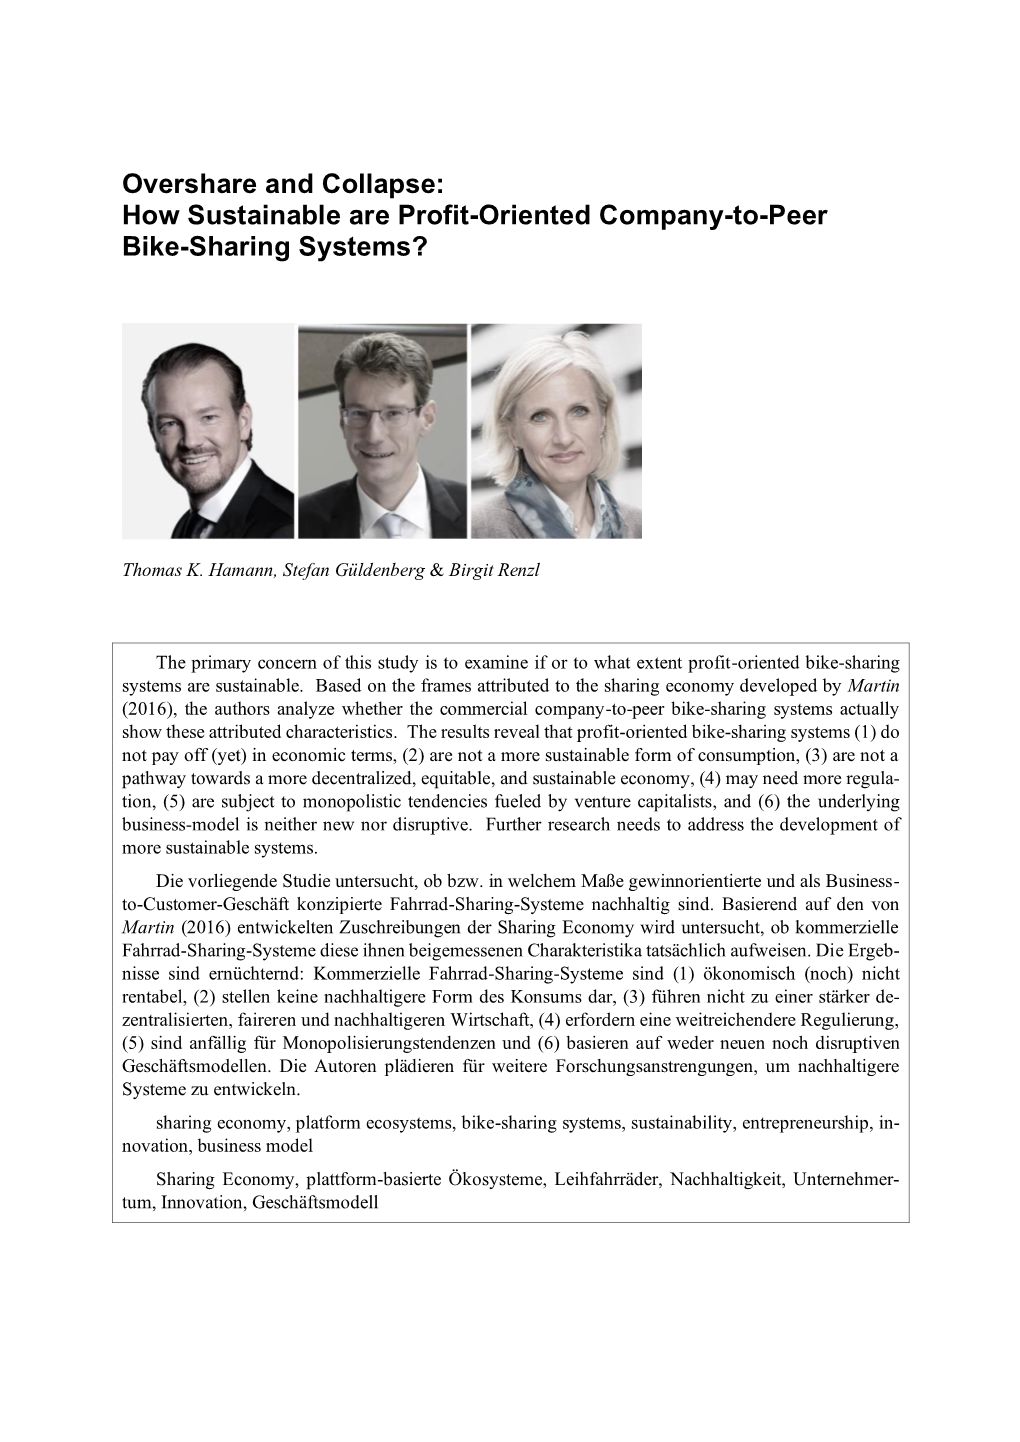 Overshare and Collapse: How Sustainable Are Profit-Oriented Company-To-Peer Bike-Sharing Systems?